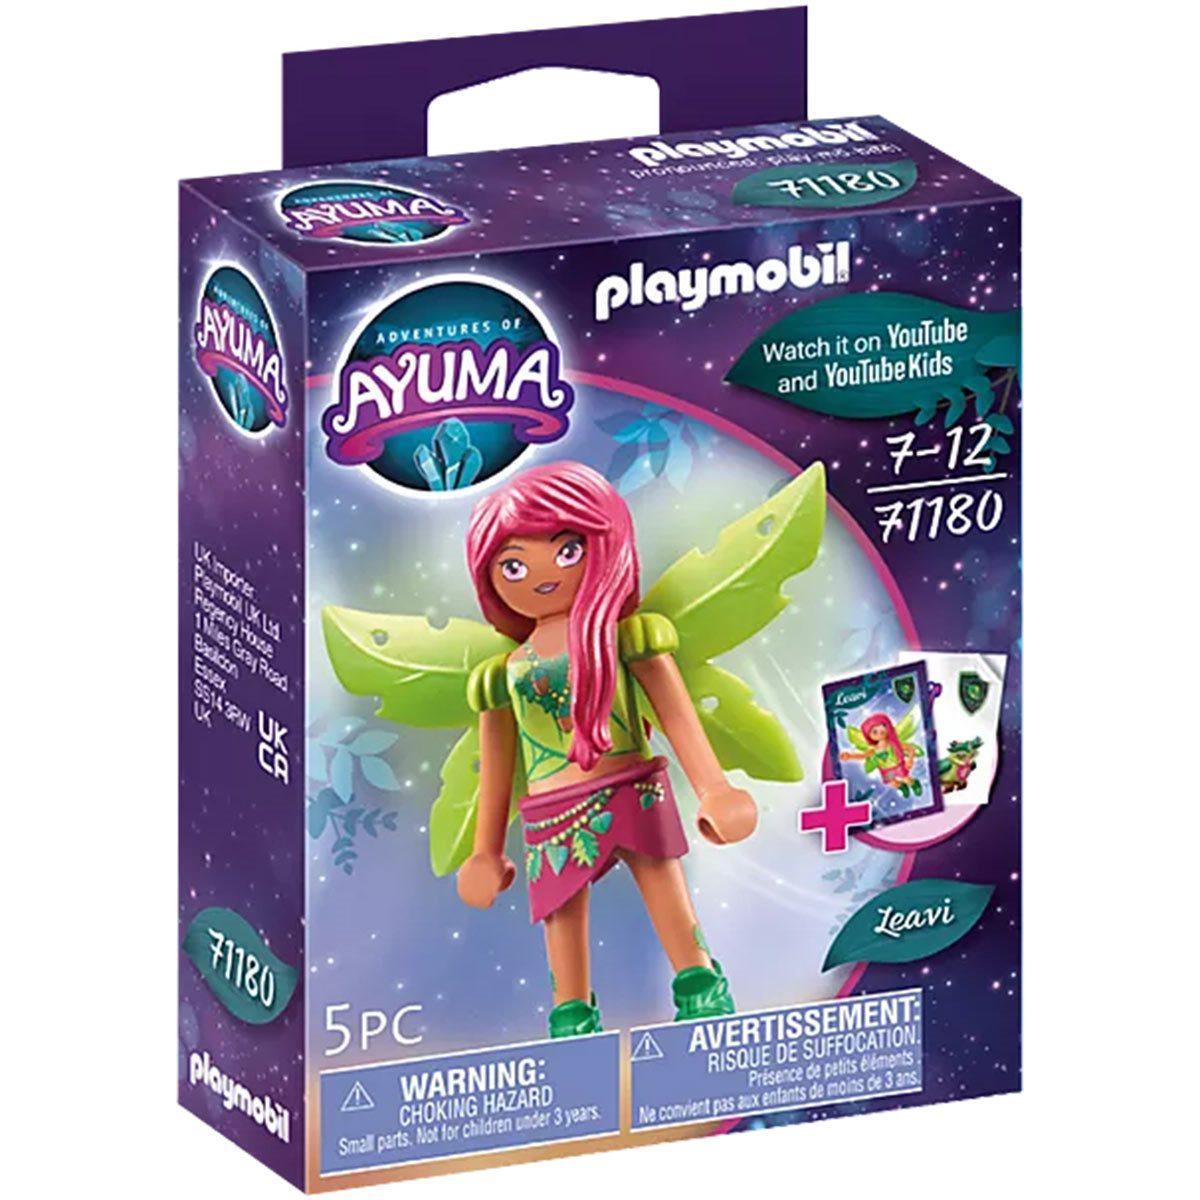 Playmobil-Adventures of Ayuna - Forest Fairy Leavi-71180-Legacy Toys